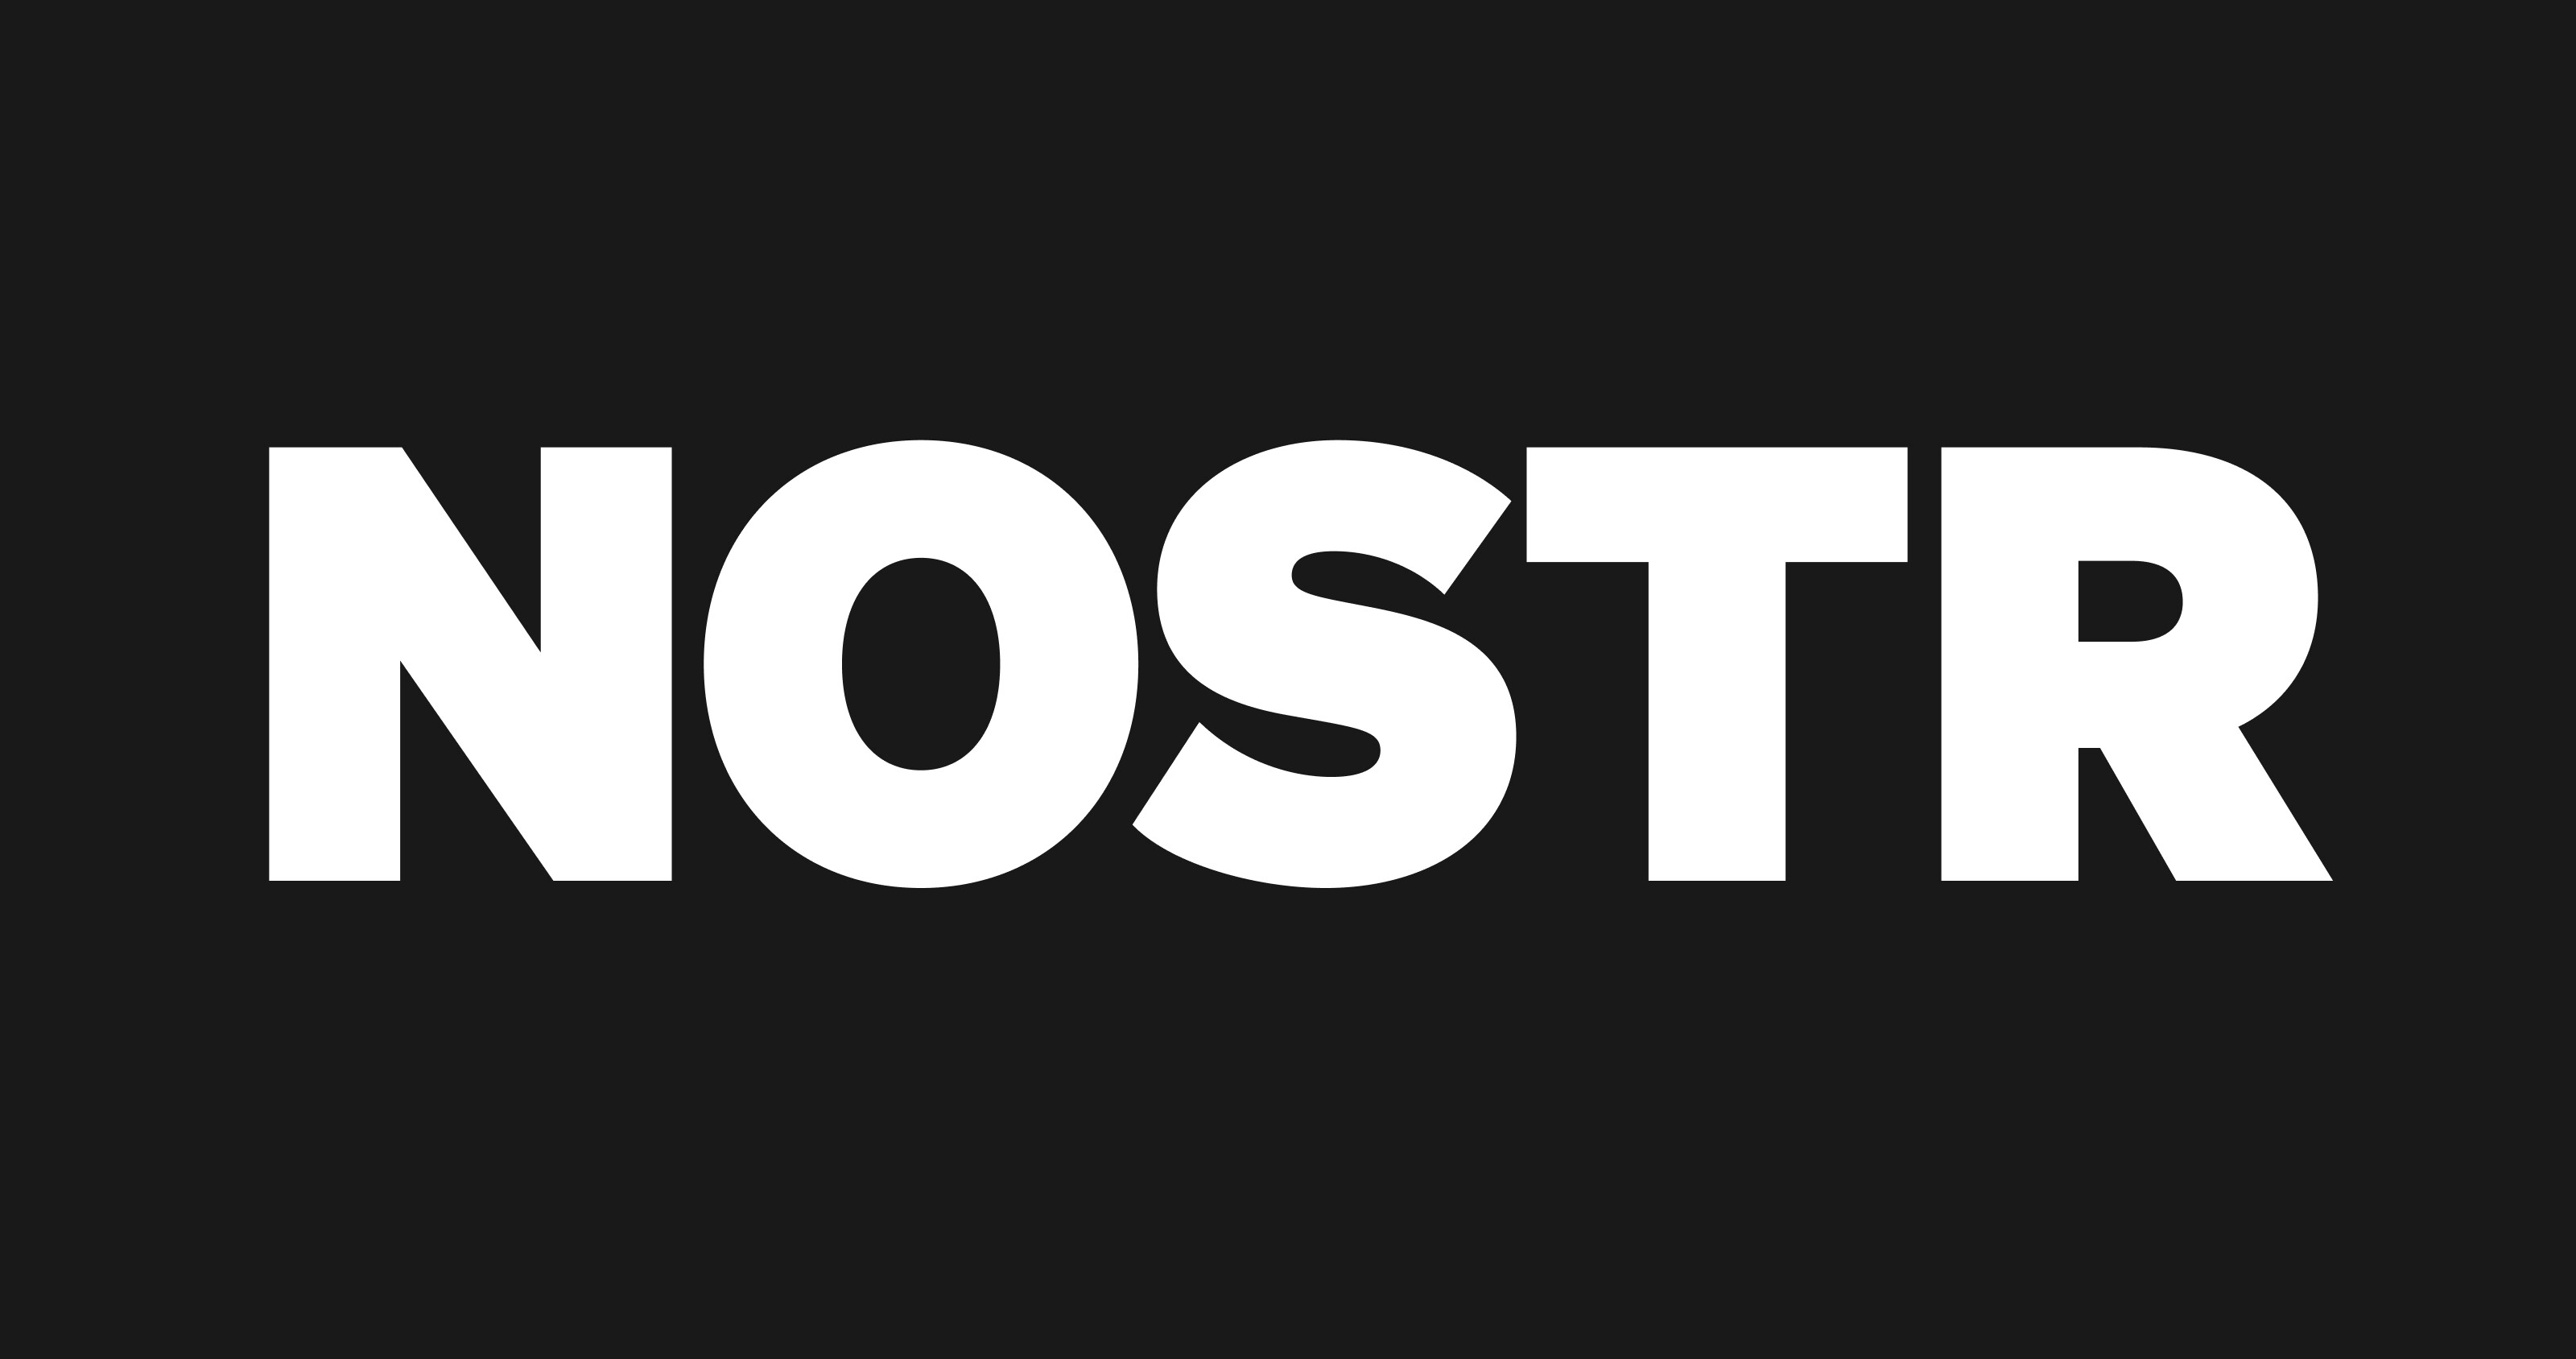 What is NOSTR?